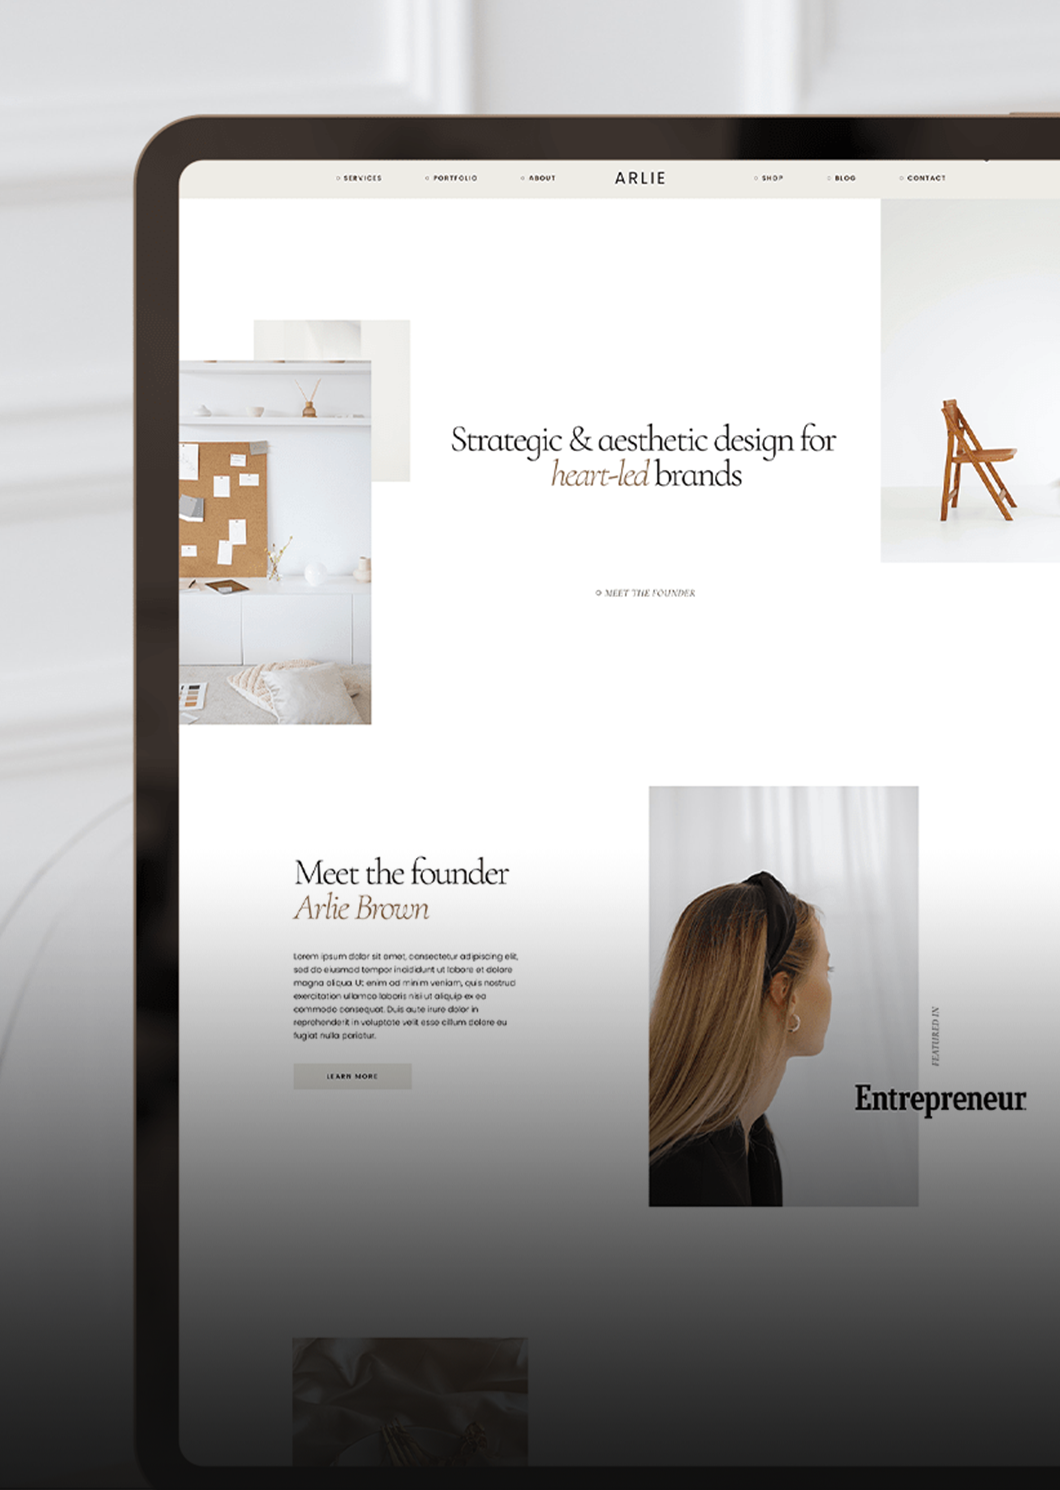 The Styled Square | Blog: Guides, Tutorials, & Resources for Website ...